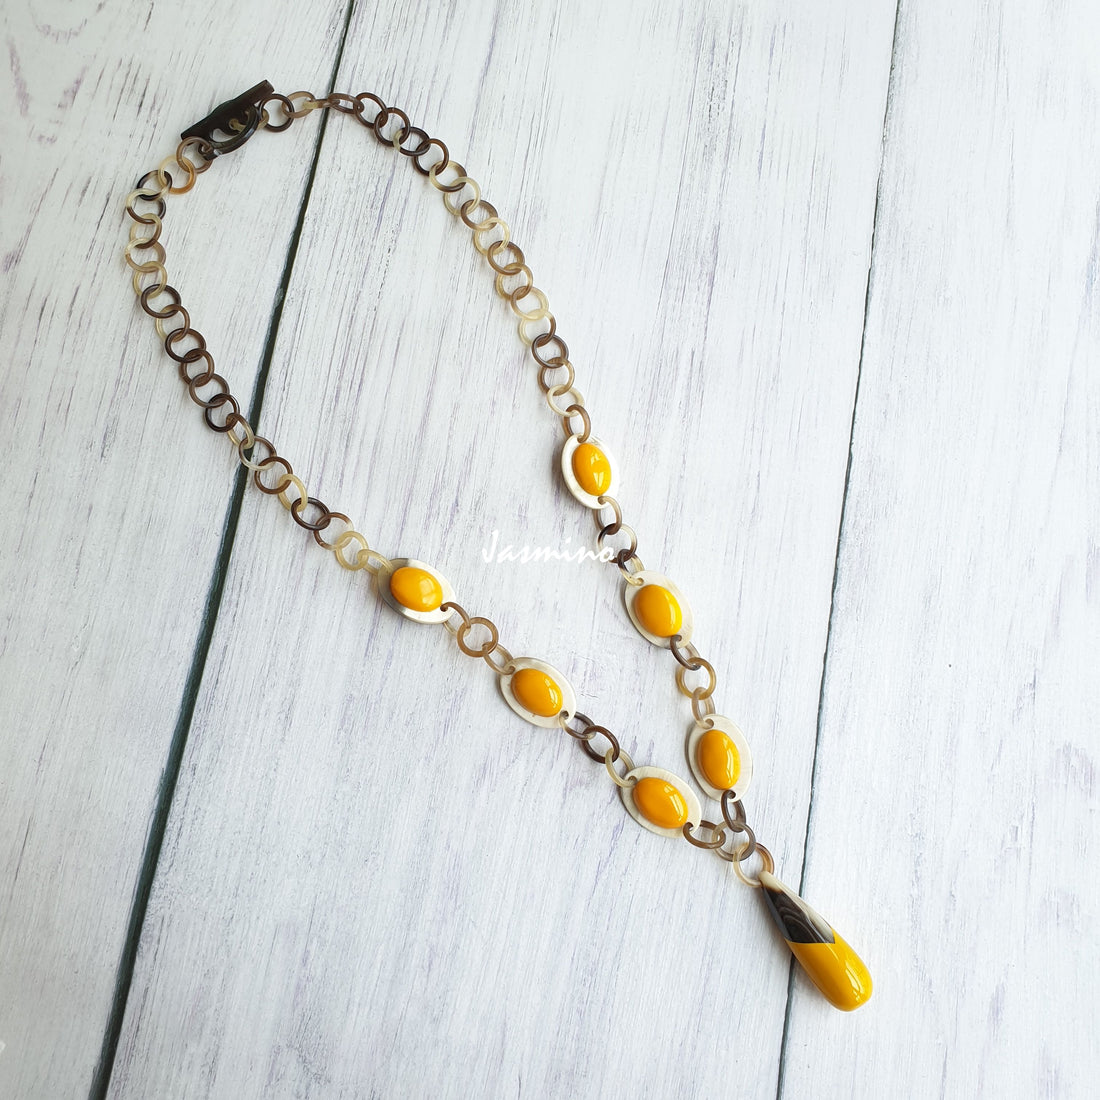 Jasmino unique handmade Vintage egg shaped chain necklace features yellow in natural buffalo horn for Thanksgiving